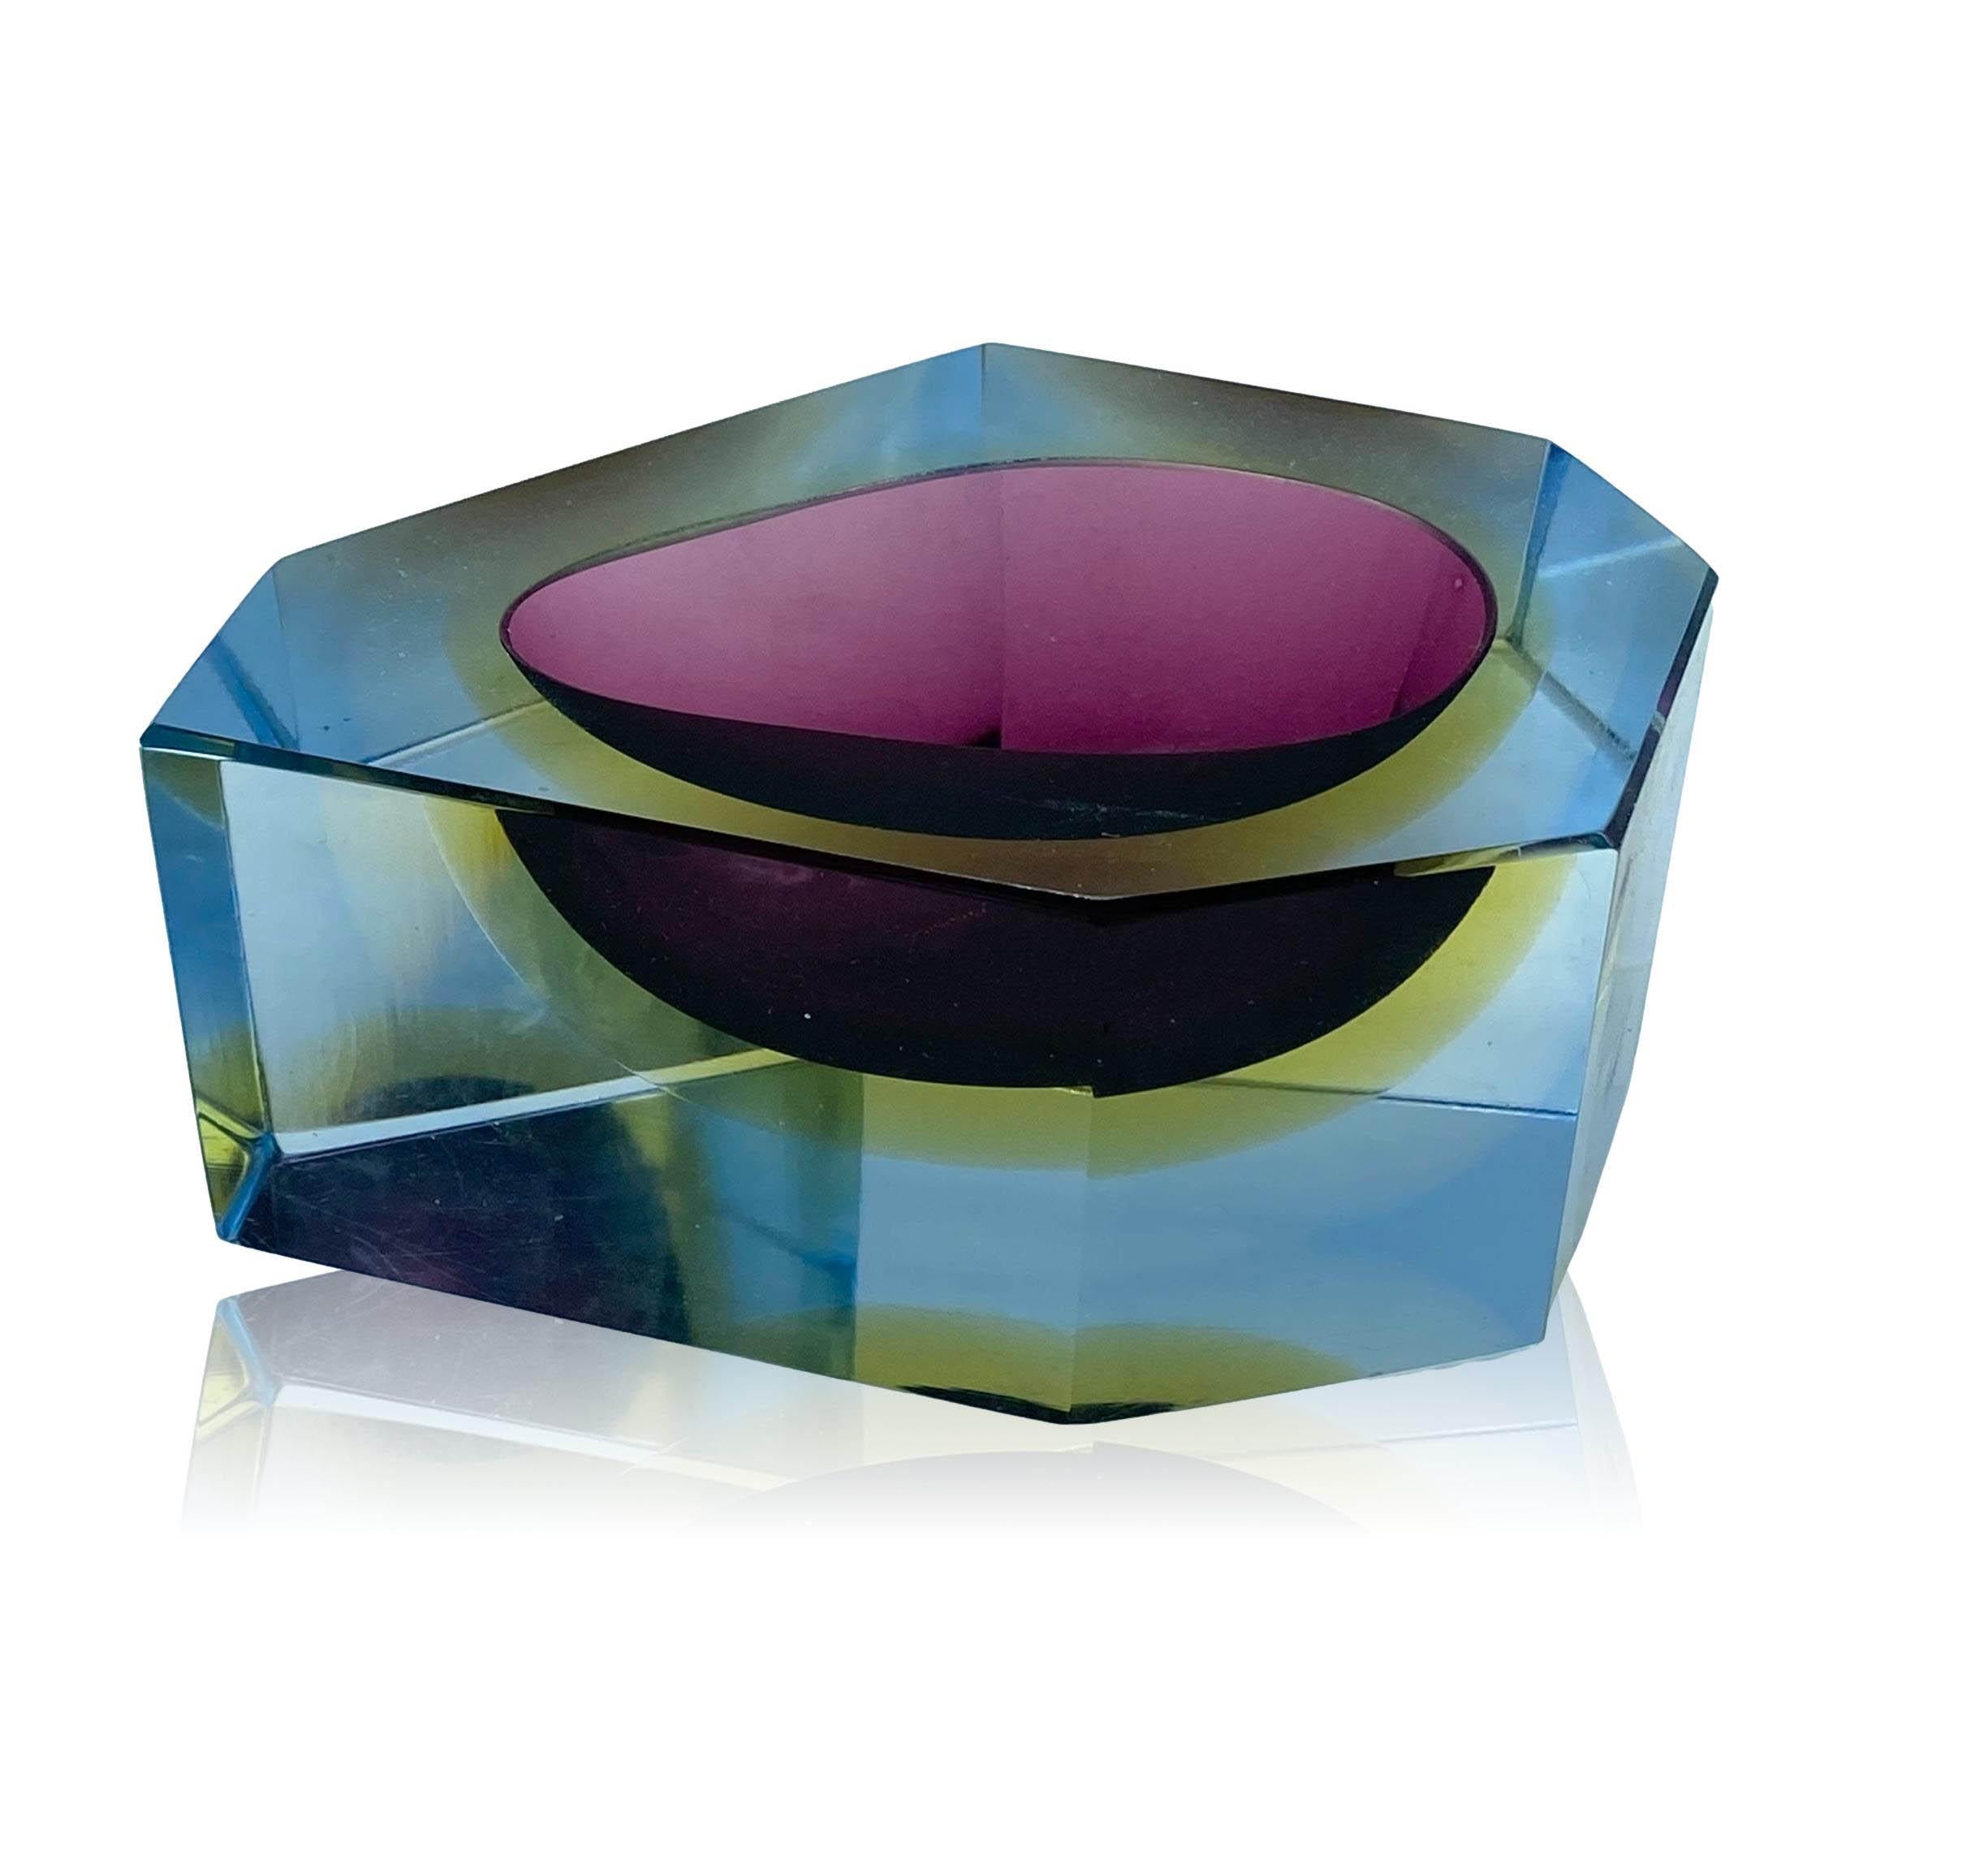 Spectacular bowl or ashtray with geometric shape, in submerged murano glass by Flavio Poli for Seguso from the 1970s, purple, amber and transparent colors.